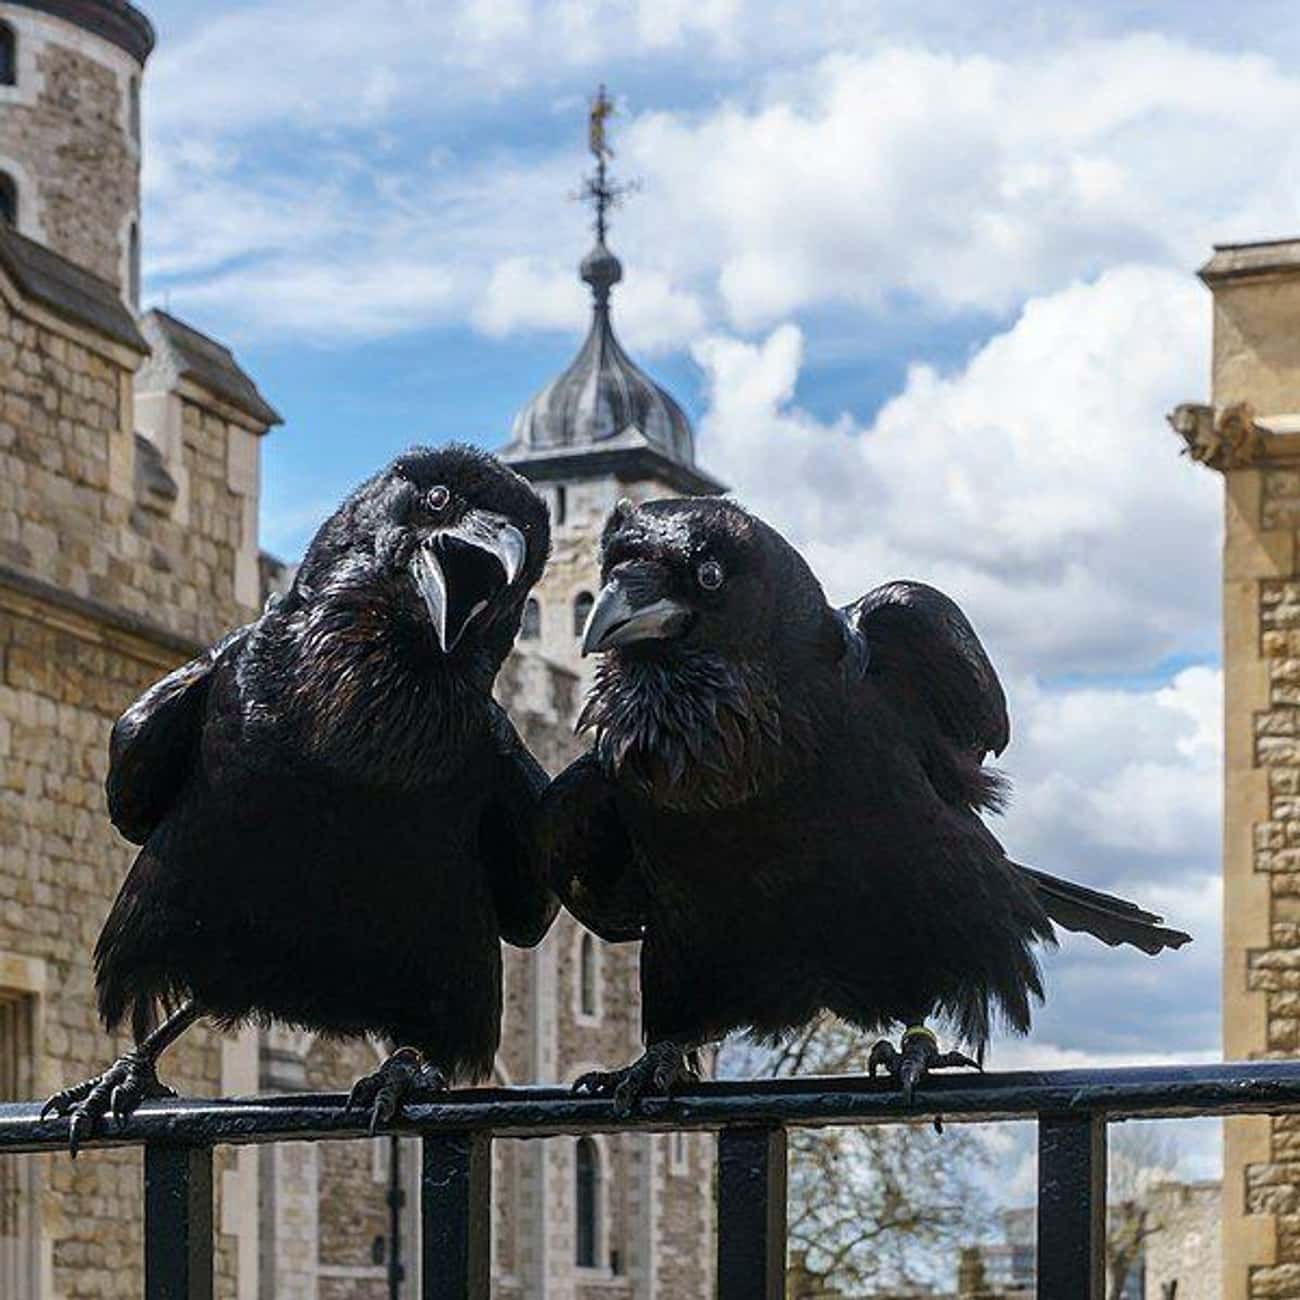 Ravens Are Kept At The Tower Of London Because Without Them, It’s Believed Britain Will Fall 